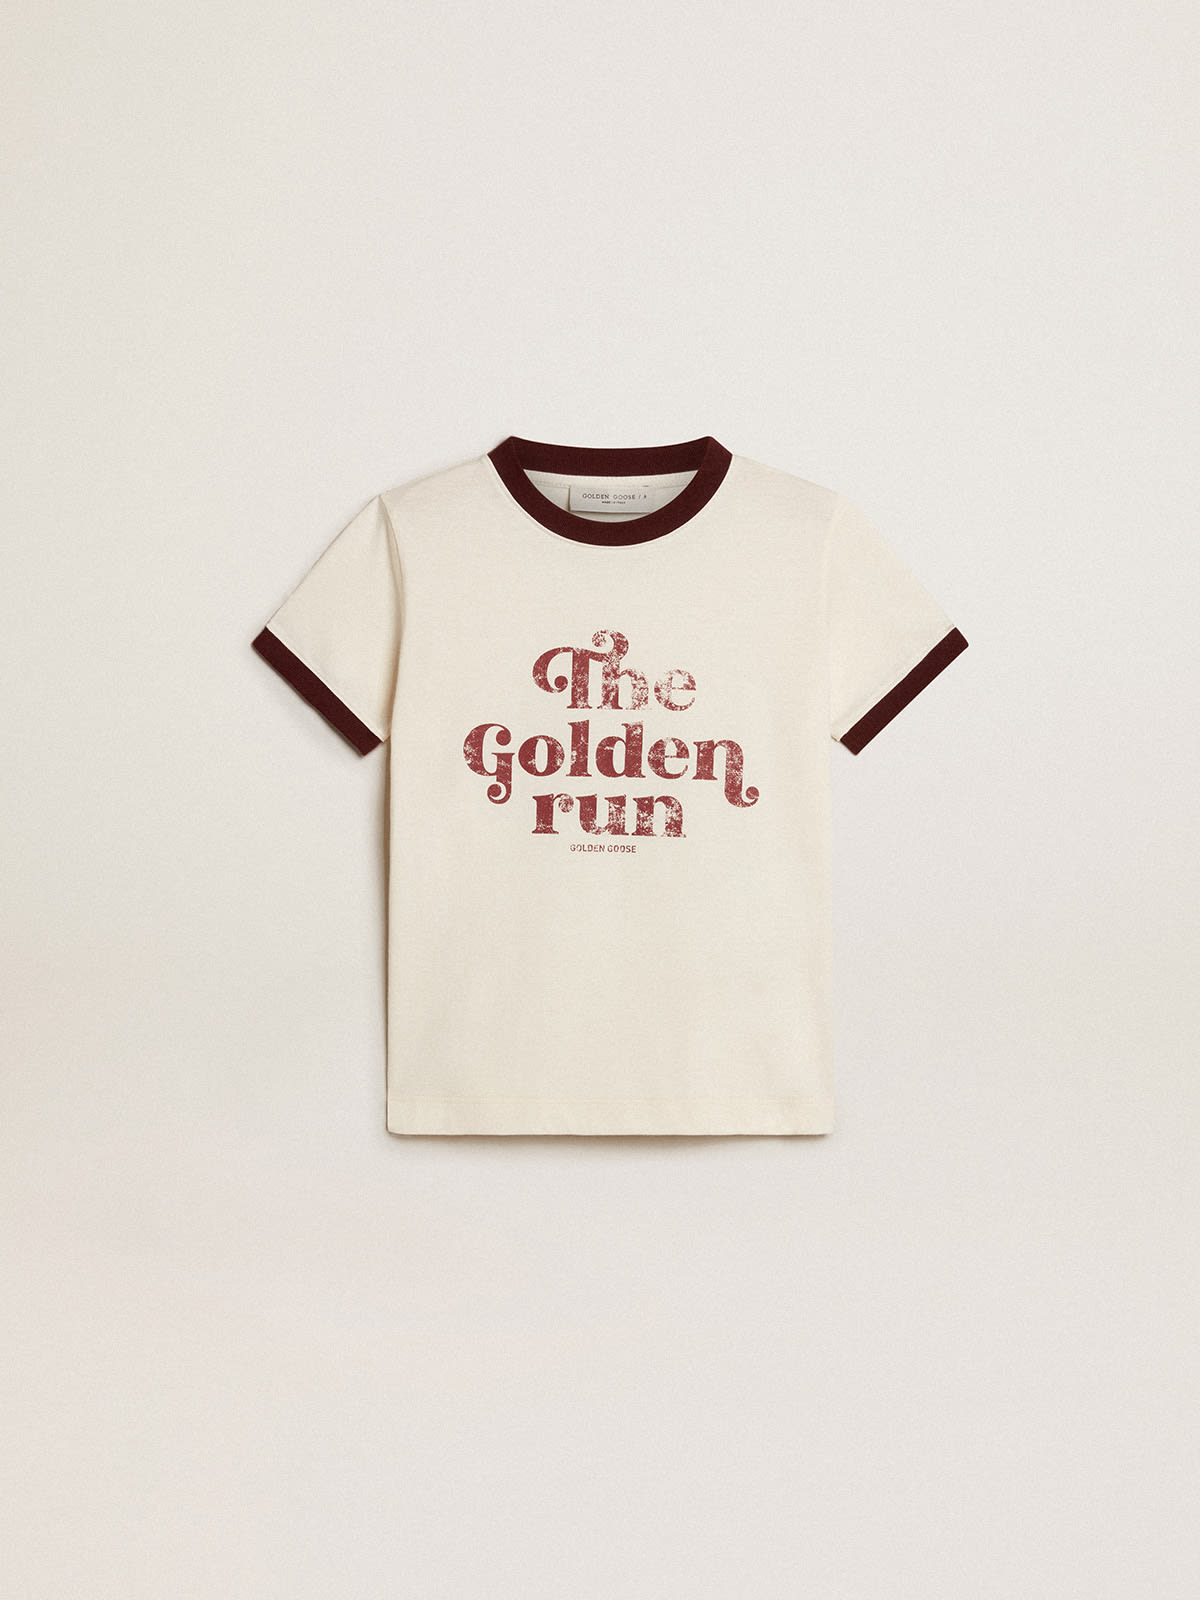 Golden Goose - Boys’ white cotton T-shirt with faded print at the center in 